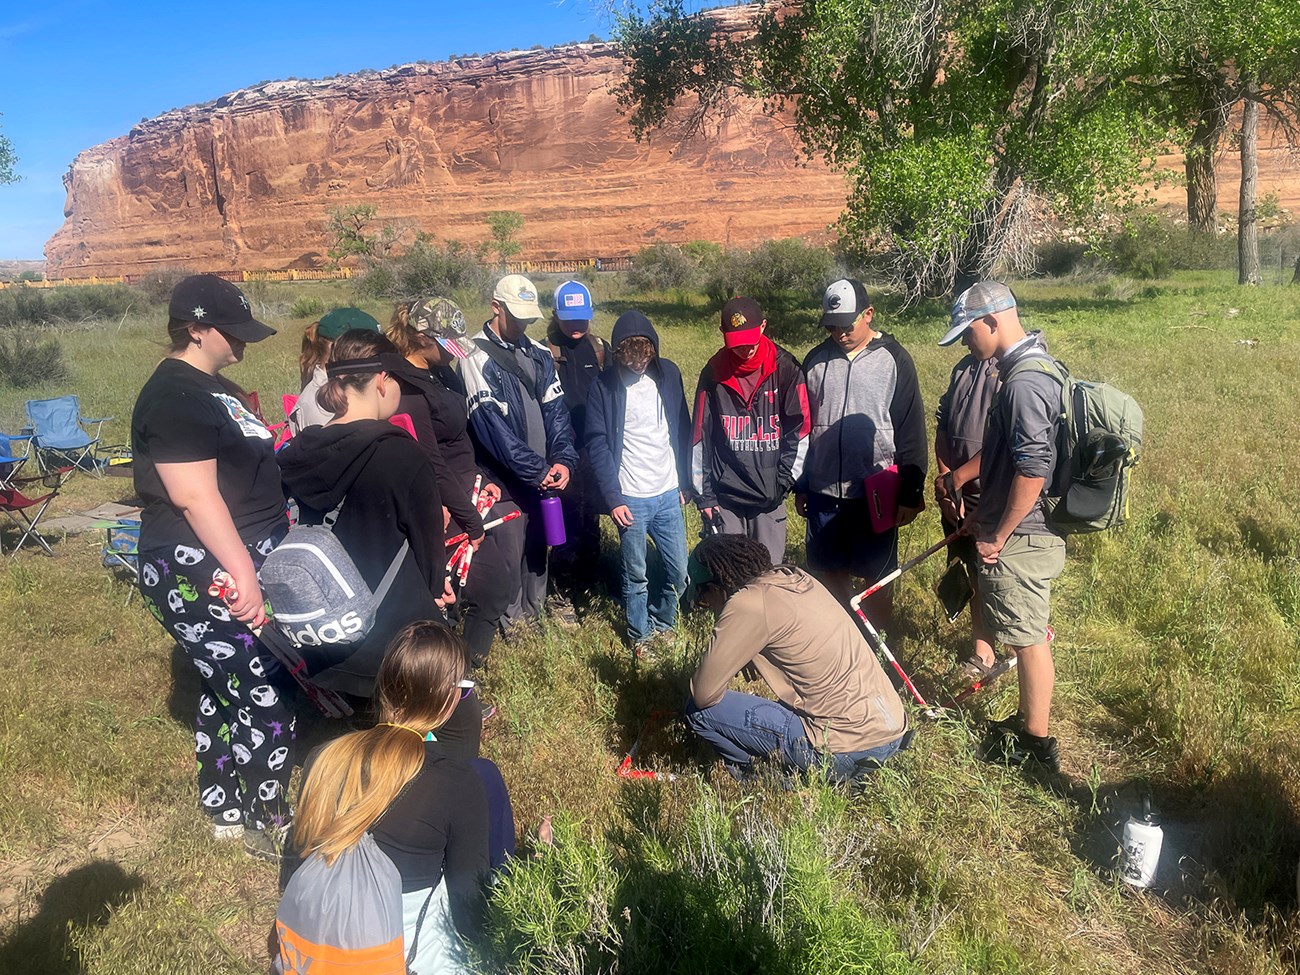 Group of standing students surround a woman sitting on the ground in a grassy field, with measuring equipment. Red rock cliffs surround them.